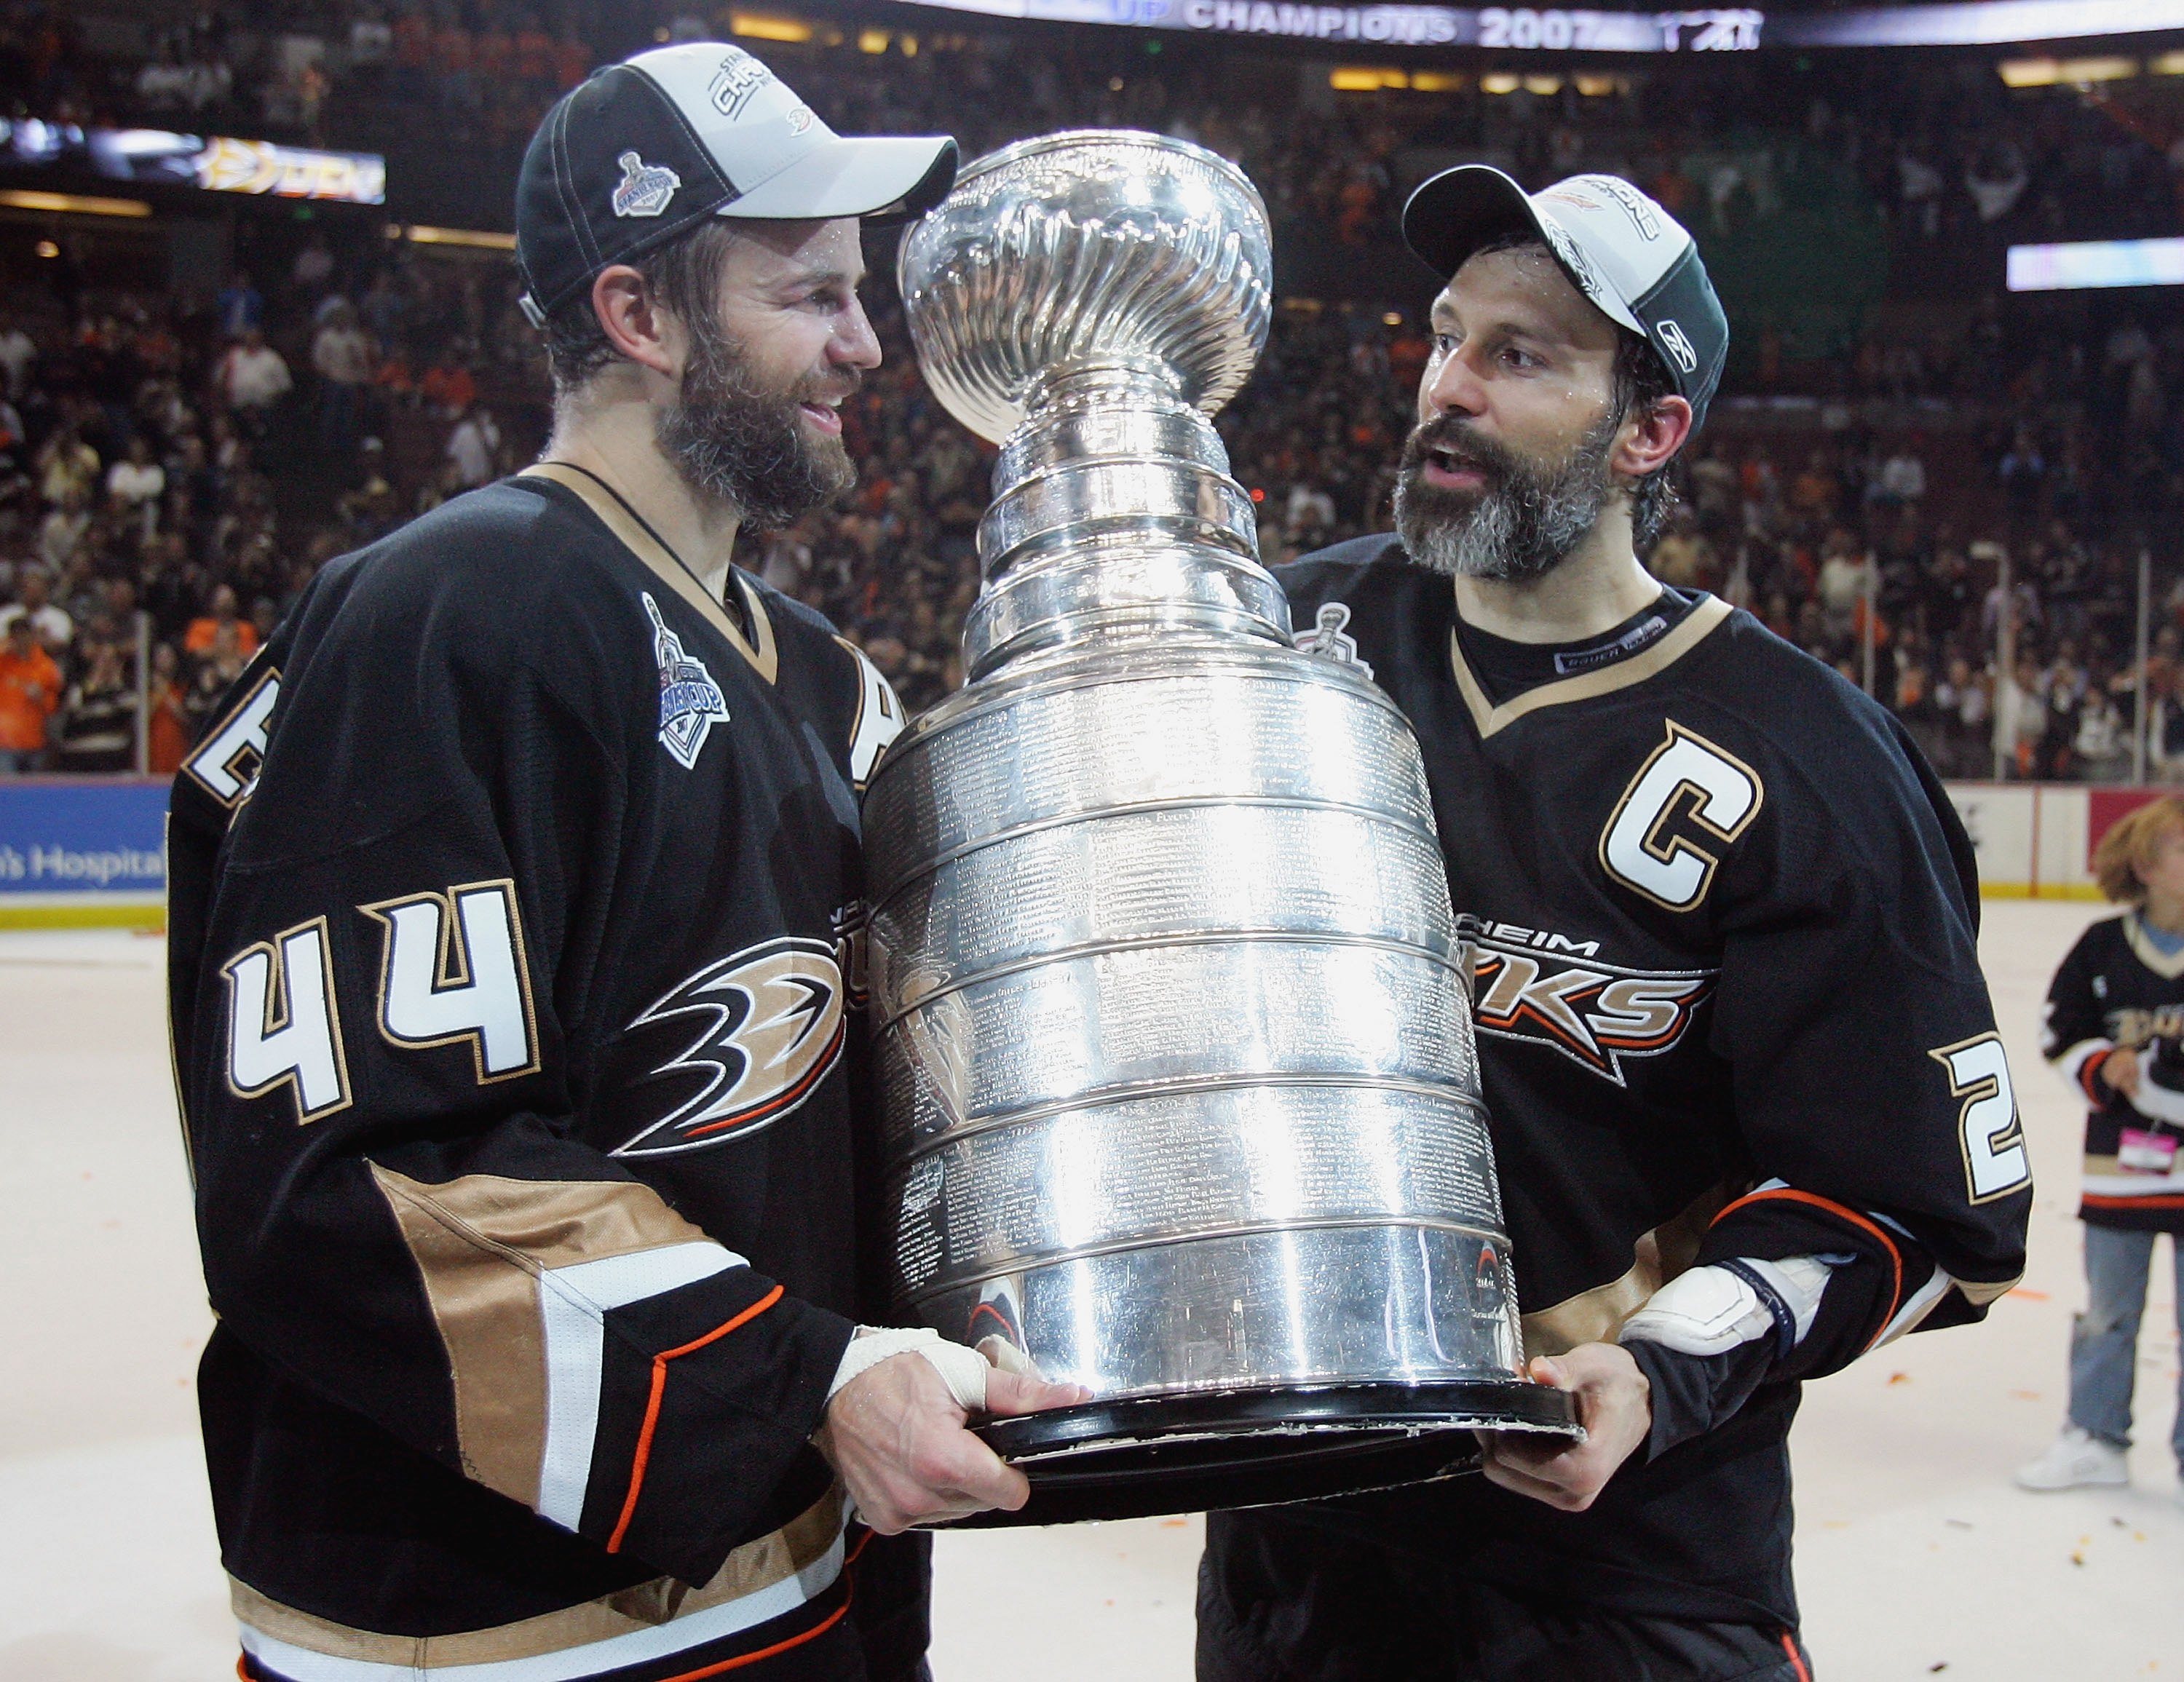 2011 Stanley Cup Playoffs: How Much Does Experience Matter?